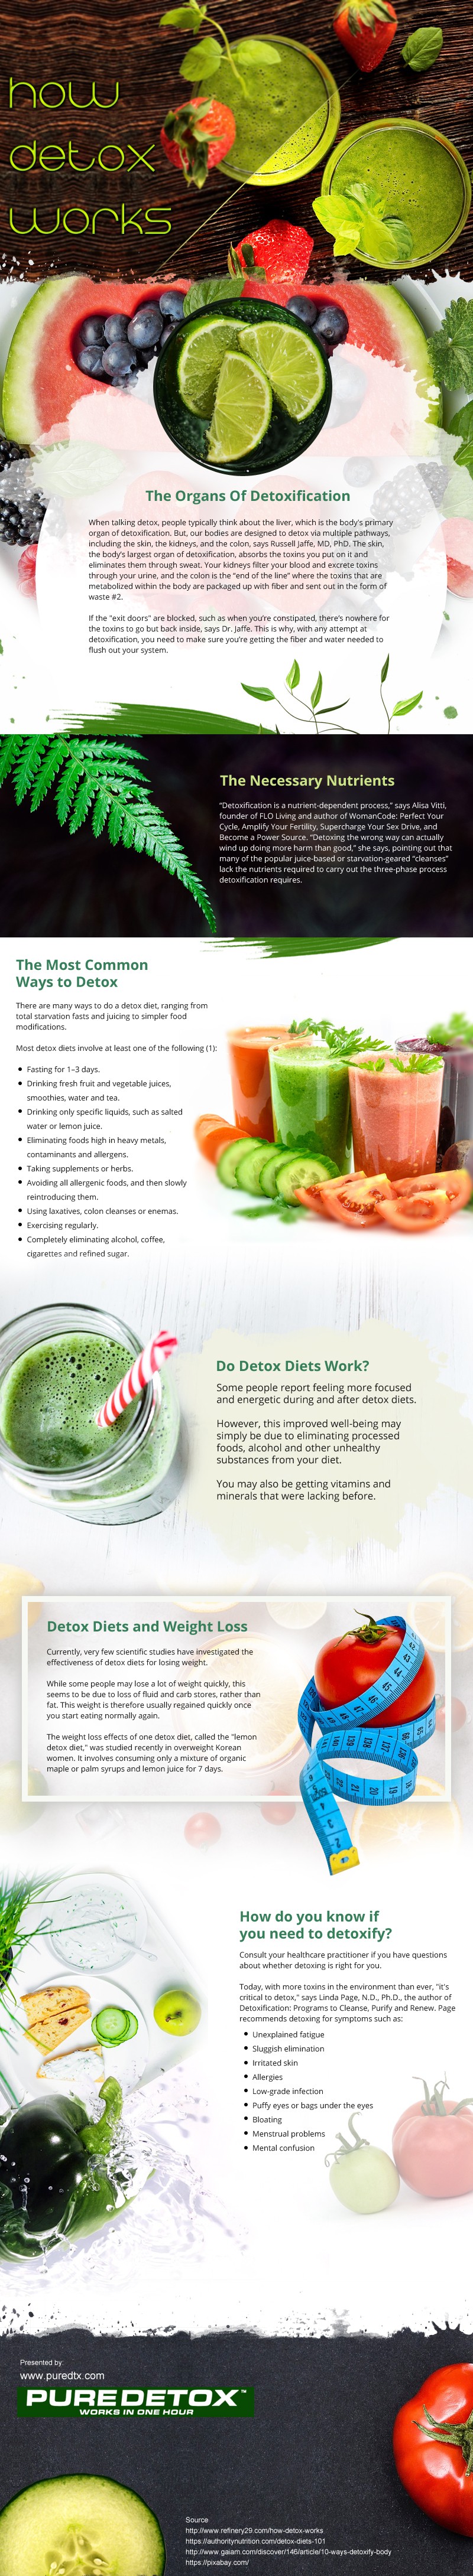 How Detox Works [infographic]